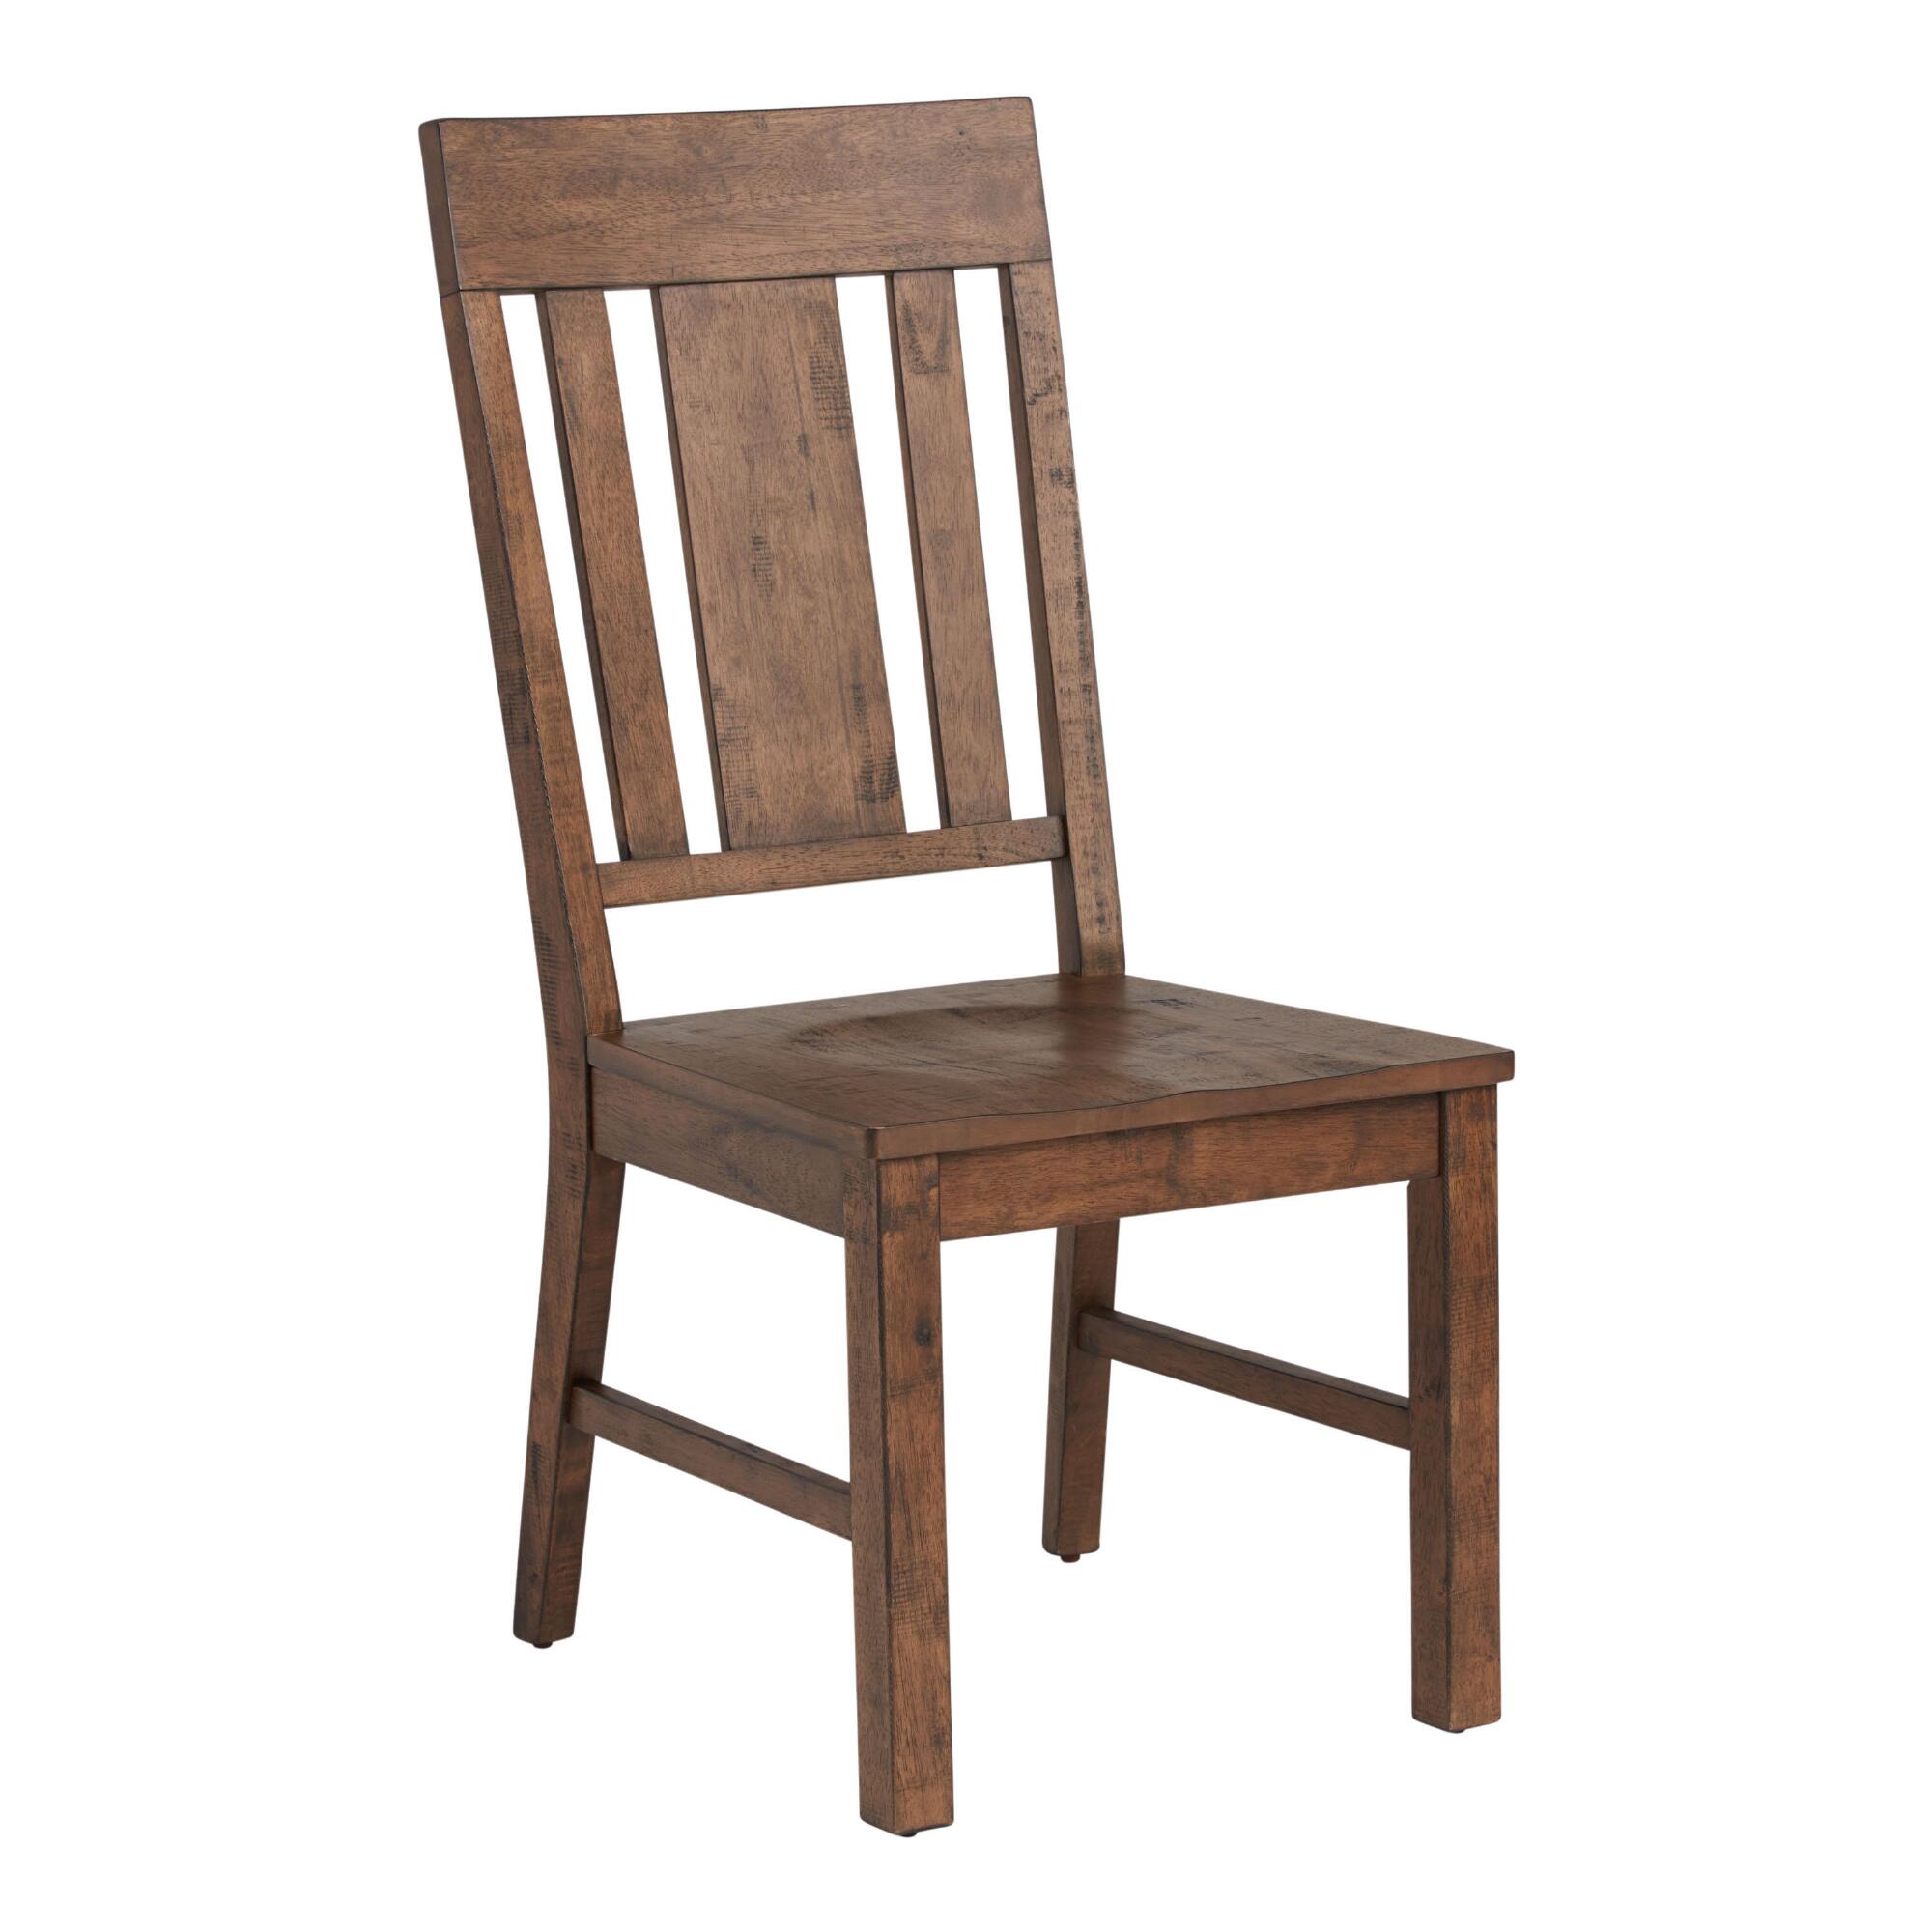 Farmhouse Leona Dining Chair Set Of 2: Brown - Wood by World Market